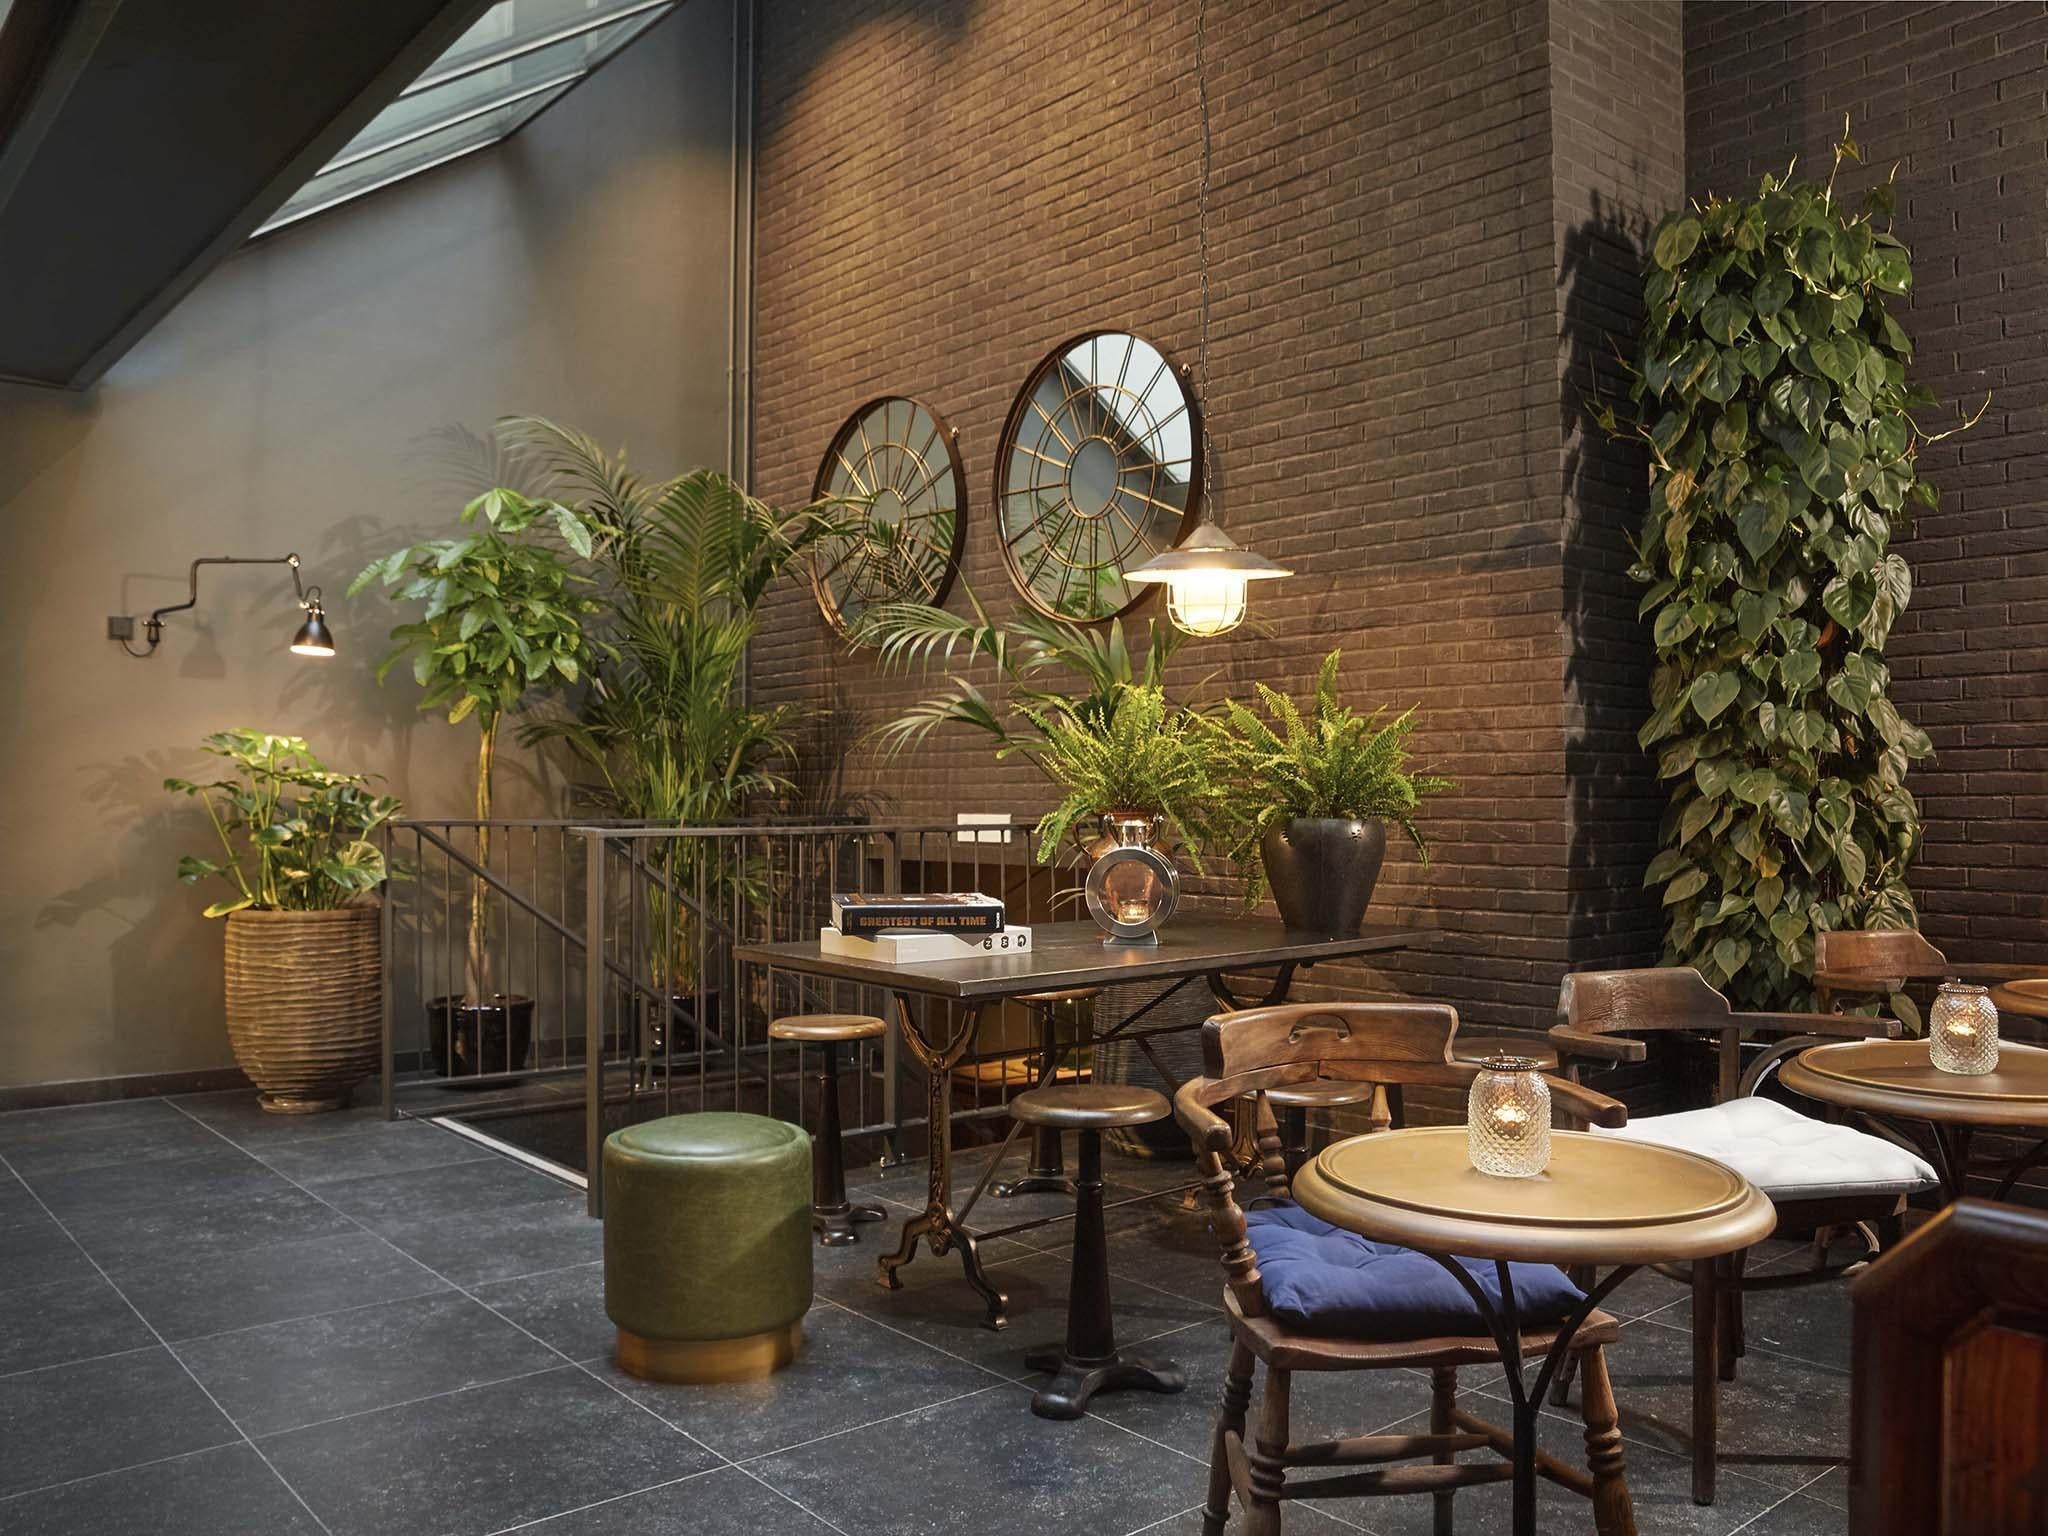 The 400-year-old buildings comprising the Pulitzer Amsterdam are rejuvenated with modern-day luxury elements.